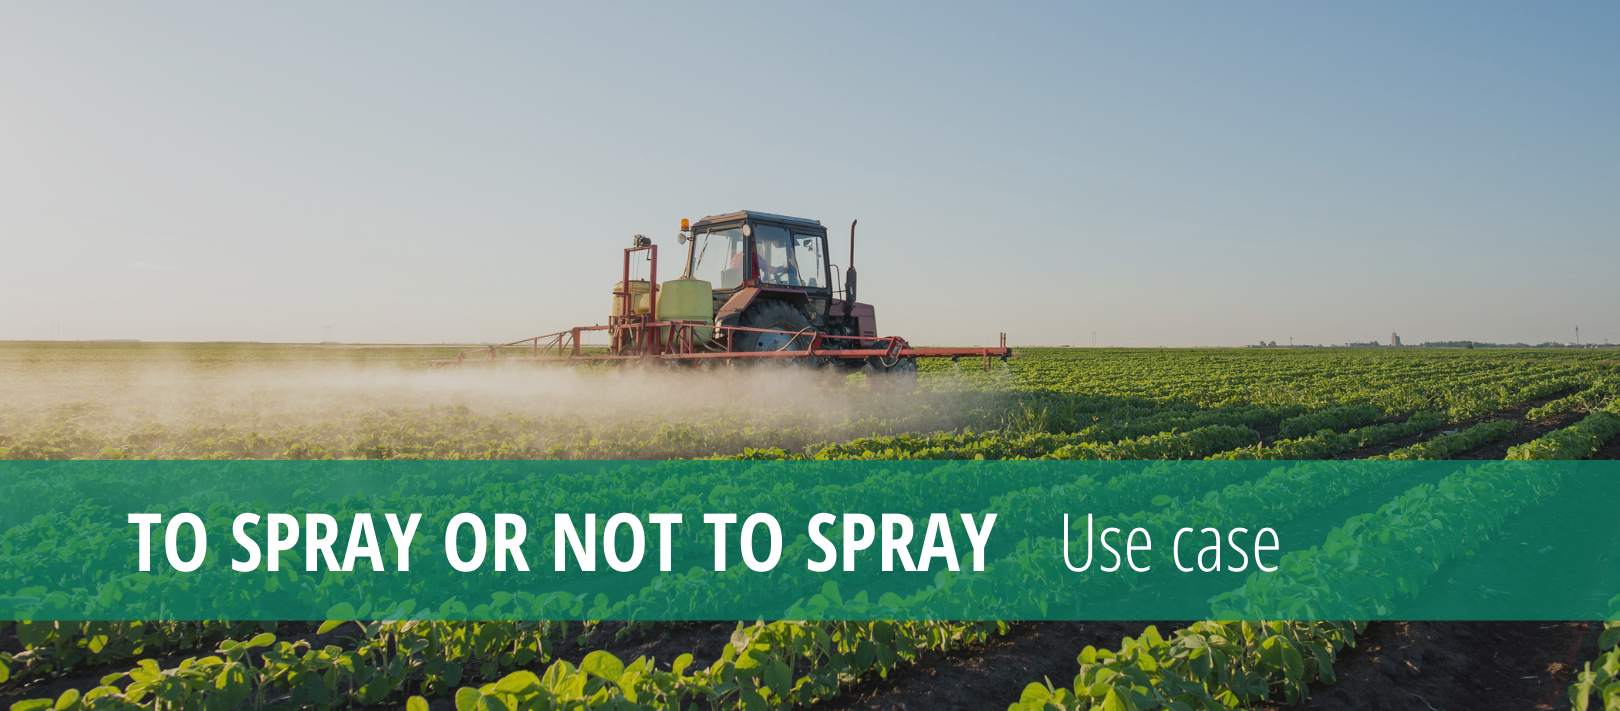 Use case_To spray or not to spray_cover